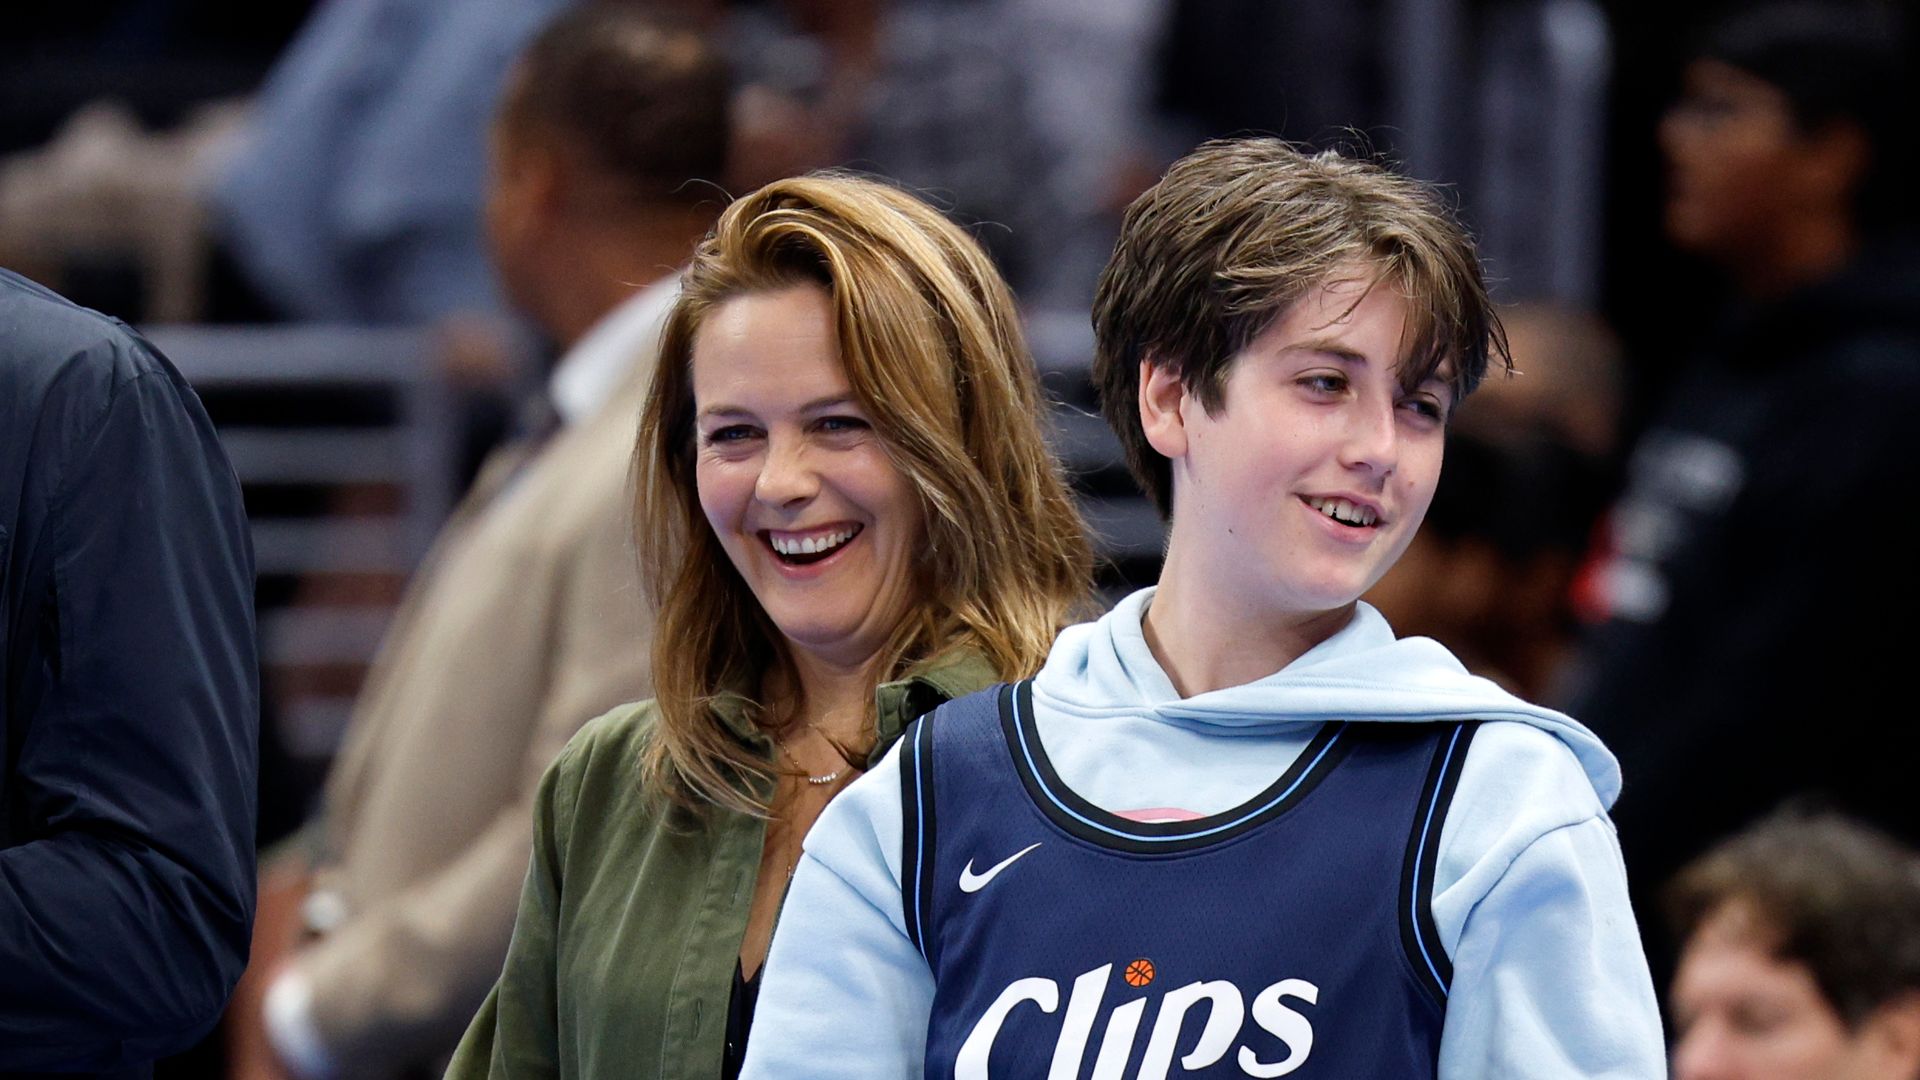 Alicia Silverstone and her son, Bear Blu, attend a basketball game between the Los Angeles Clippers and Houston Rockets 